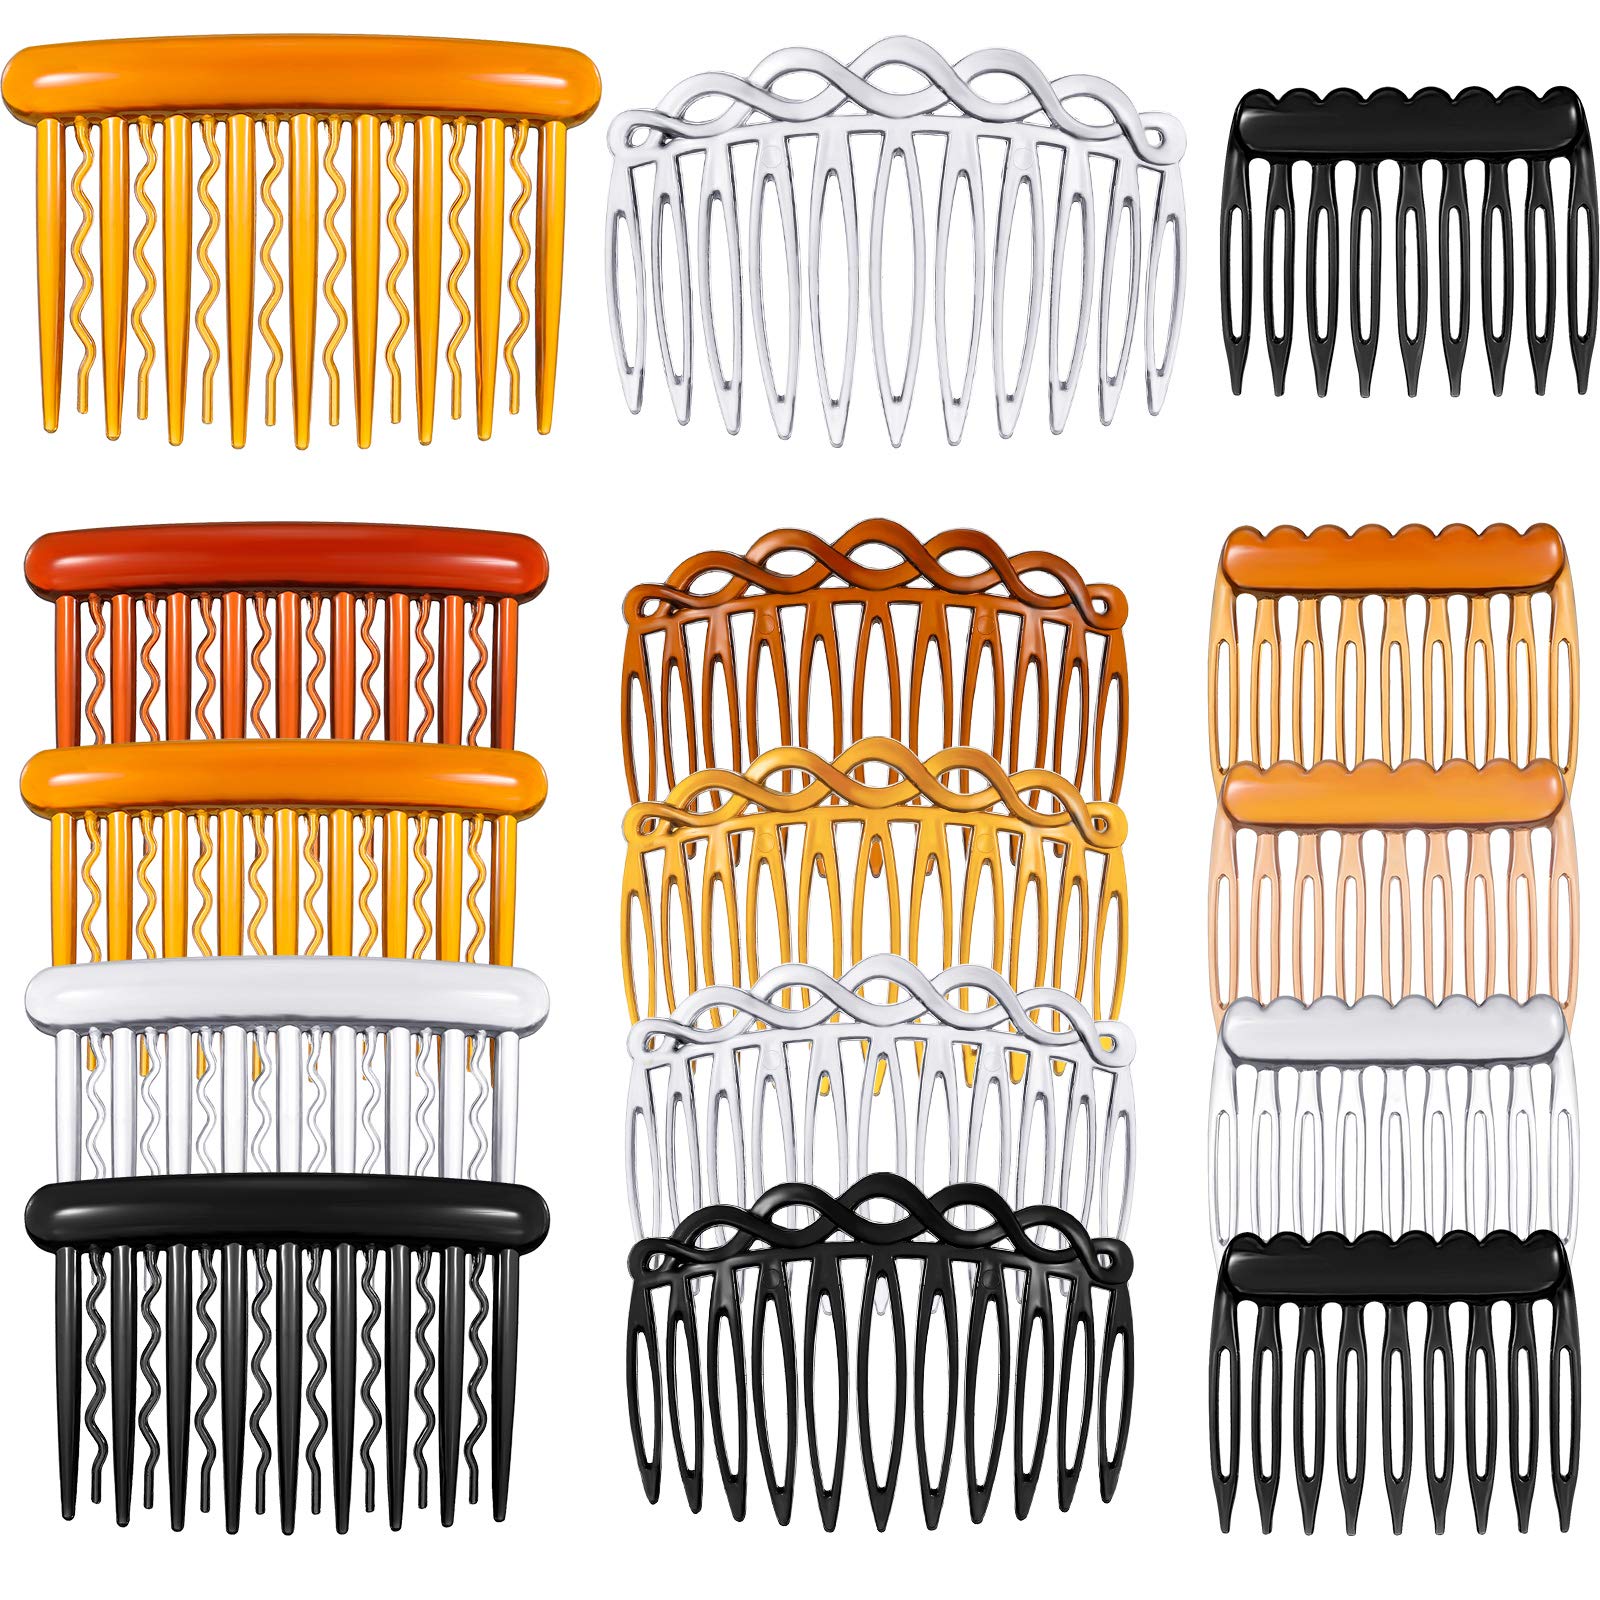 Chuangdi 12 Pieces Plastic Side Hair Twist Comb French Twist Comb Hair Clips With Teeth For Fine Hair Accessories Women Girls, 4 Colors (